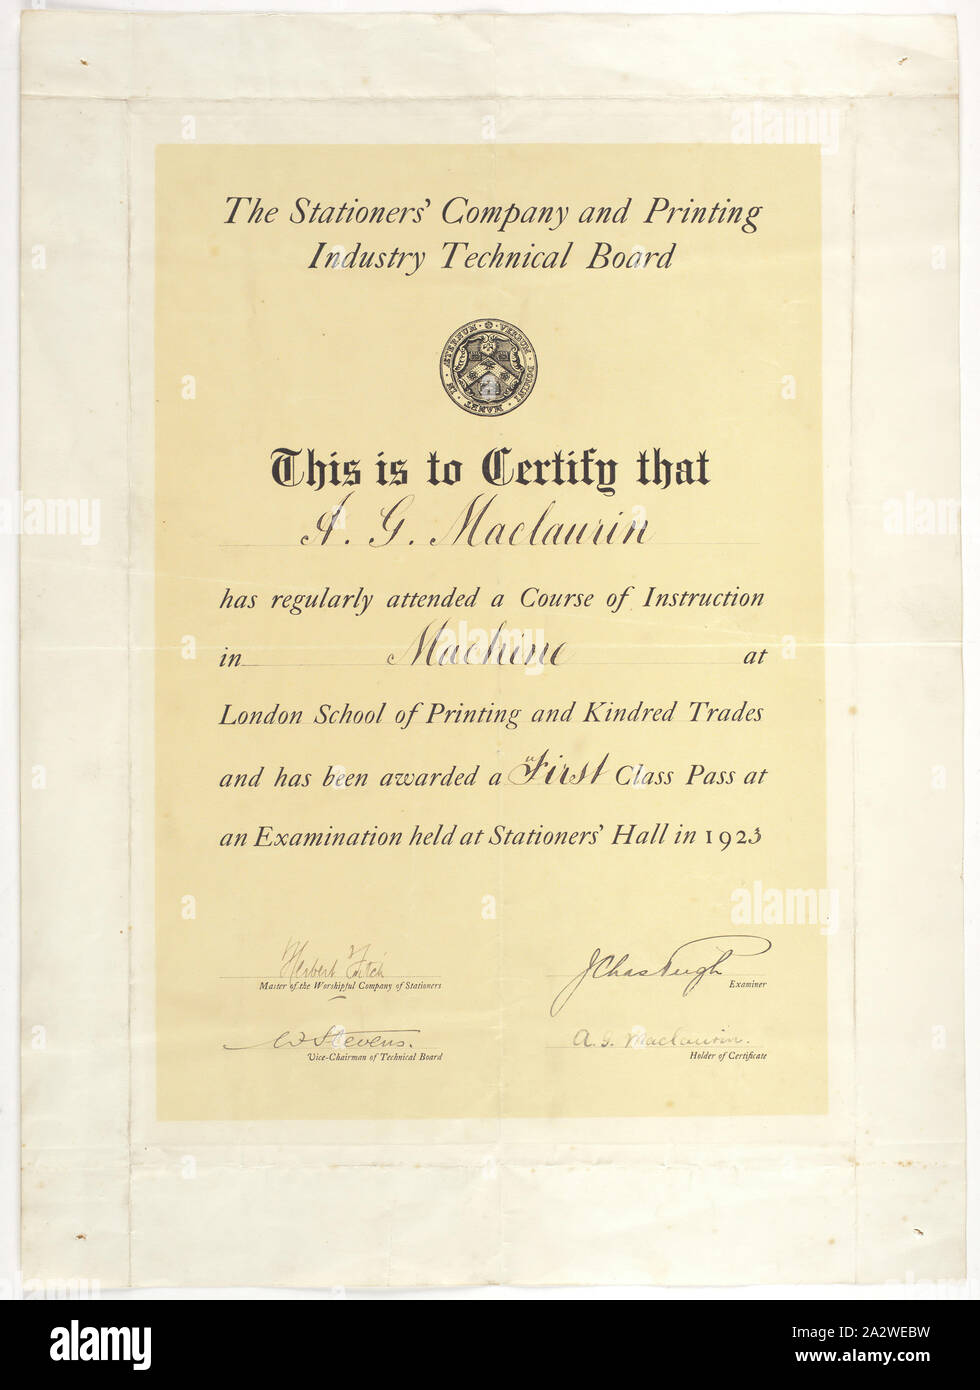 Certificate - Machine, First Class Pass, Issued to AG Maclaurin, 1923, Certificate issued to AG Maclaurin by the Stationers' Company and Printing Industry Technical Board in 1923. Certifying that he was awarded a First Class pass for his 'Machine' course. Archibald Gordon Maclaurin was born in 1904 in Westham London. He trained as a printer and sought work in Australia as there were few opportunities in England; he migrated on the 'Jervis Bay' in 1928. Before Stock Photo